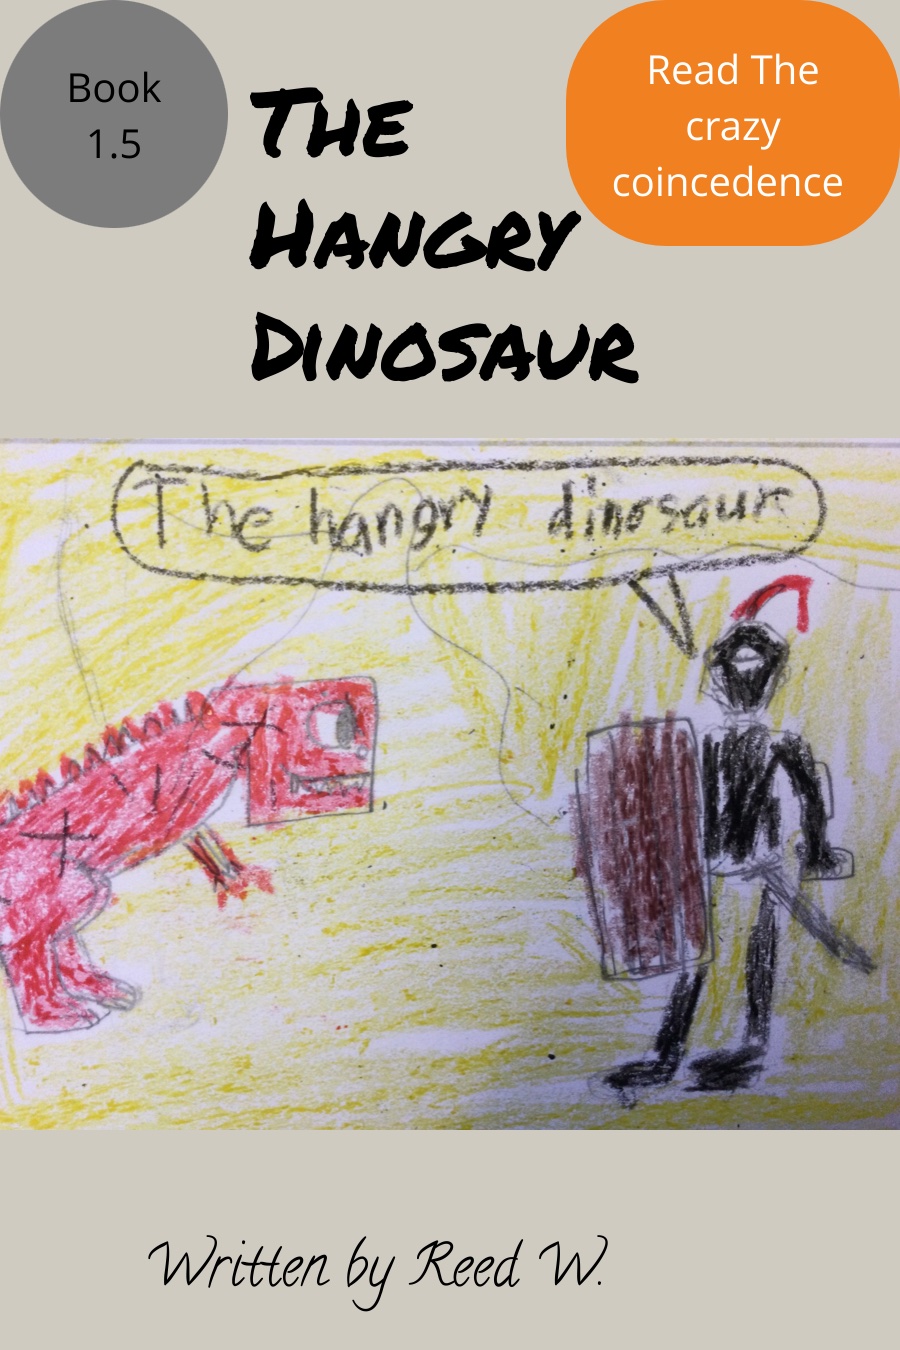 The Hangry Dinosaur by Reed W